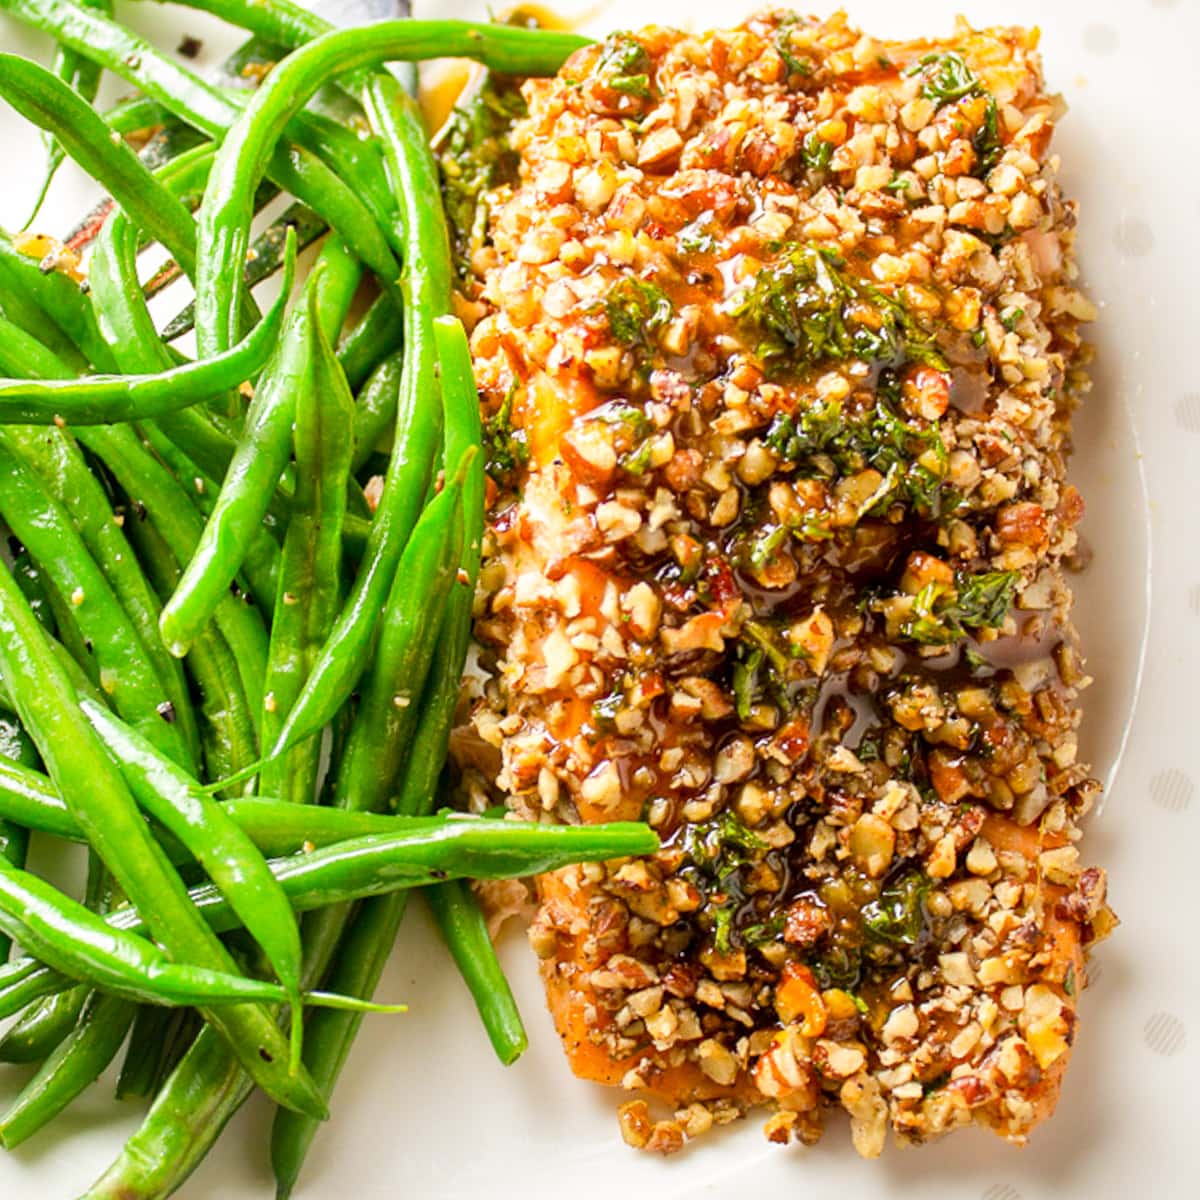 pecan crusted salmon with green beans on plate.